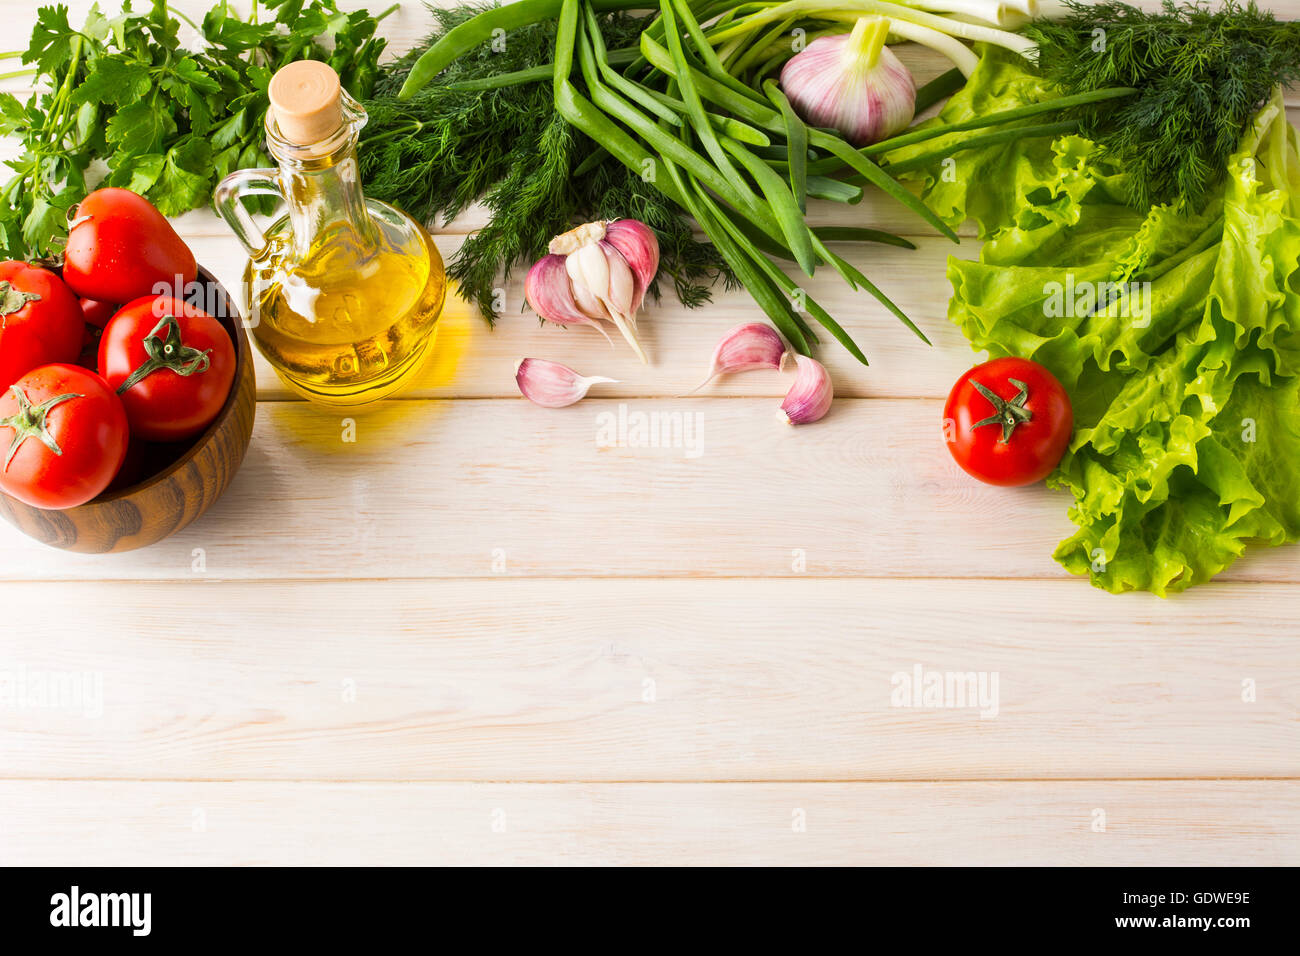 Tomato, olive oil and garlic on white wooden background. Healthy eating concept with fresh vegetables. Vegetarian  vegan food ba Stock Photo